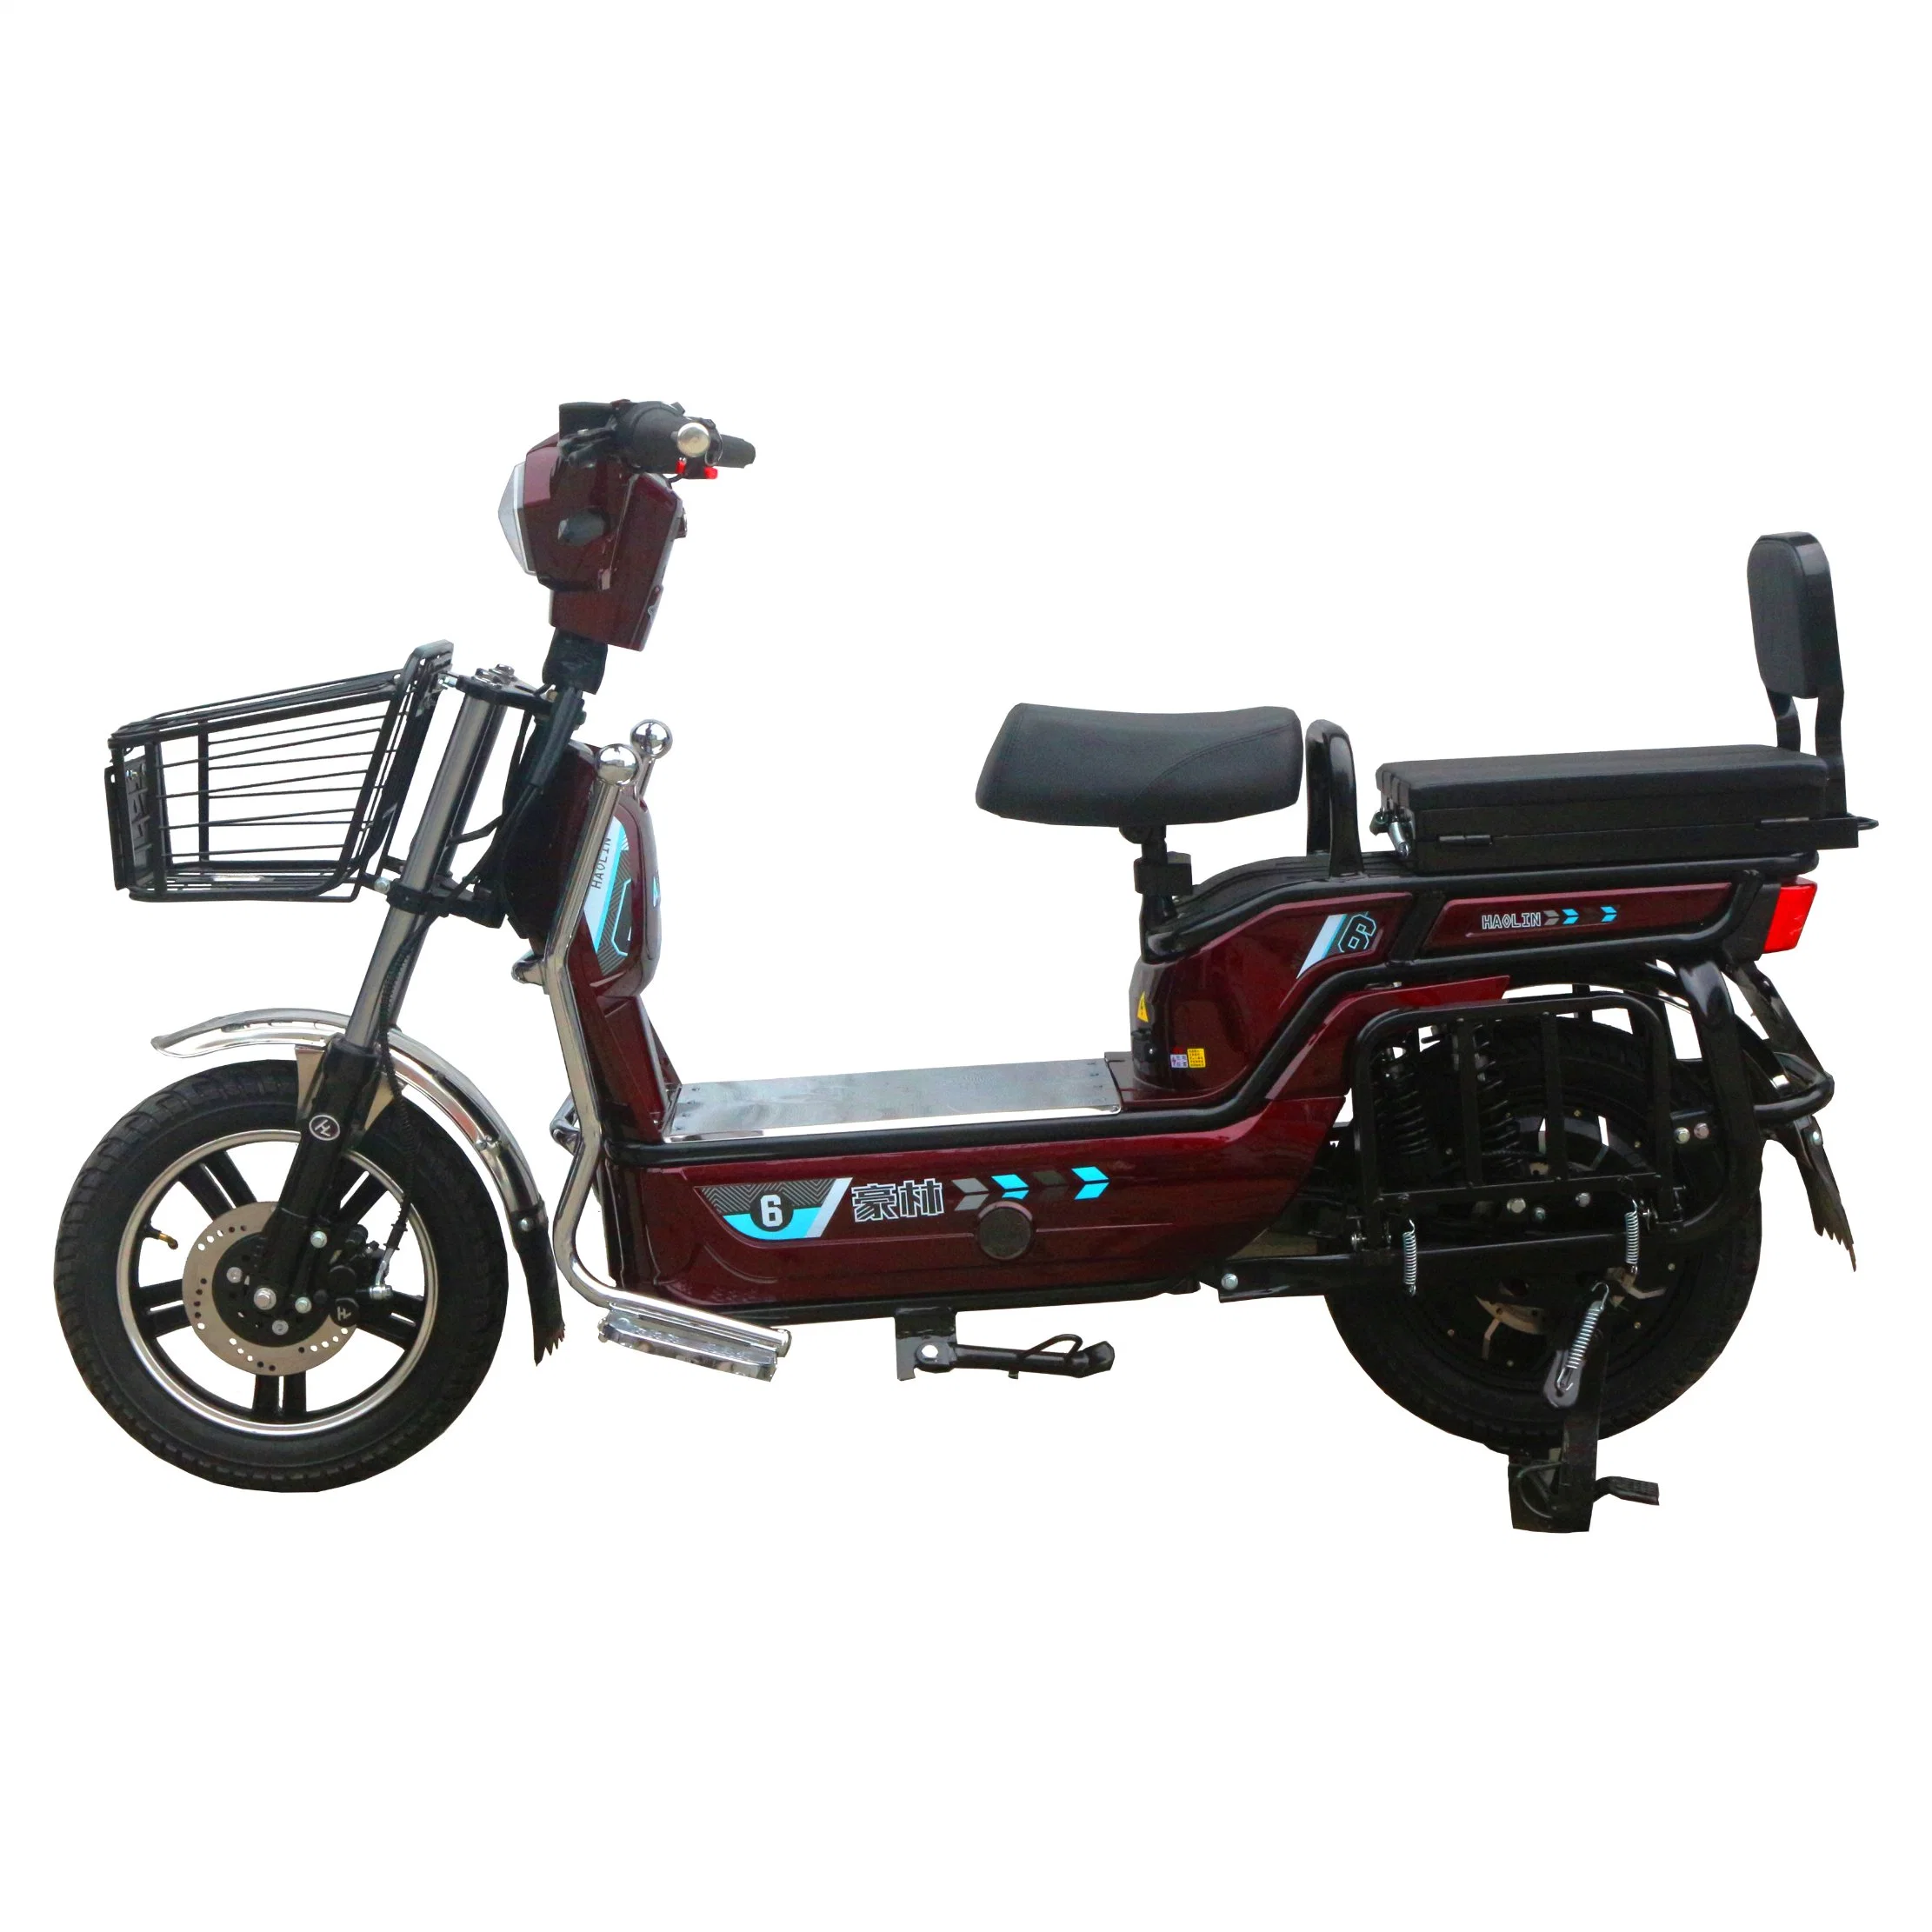 China Supplier 800W 72V 45km/H Front and Rear Shock Absorption Adult E-Scooter Motorcycle Bike for Daily Trips